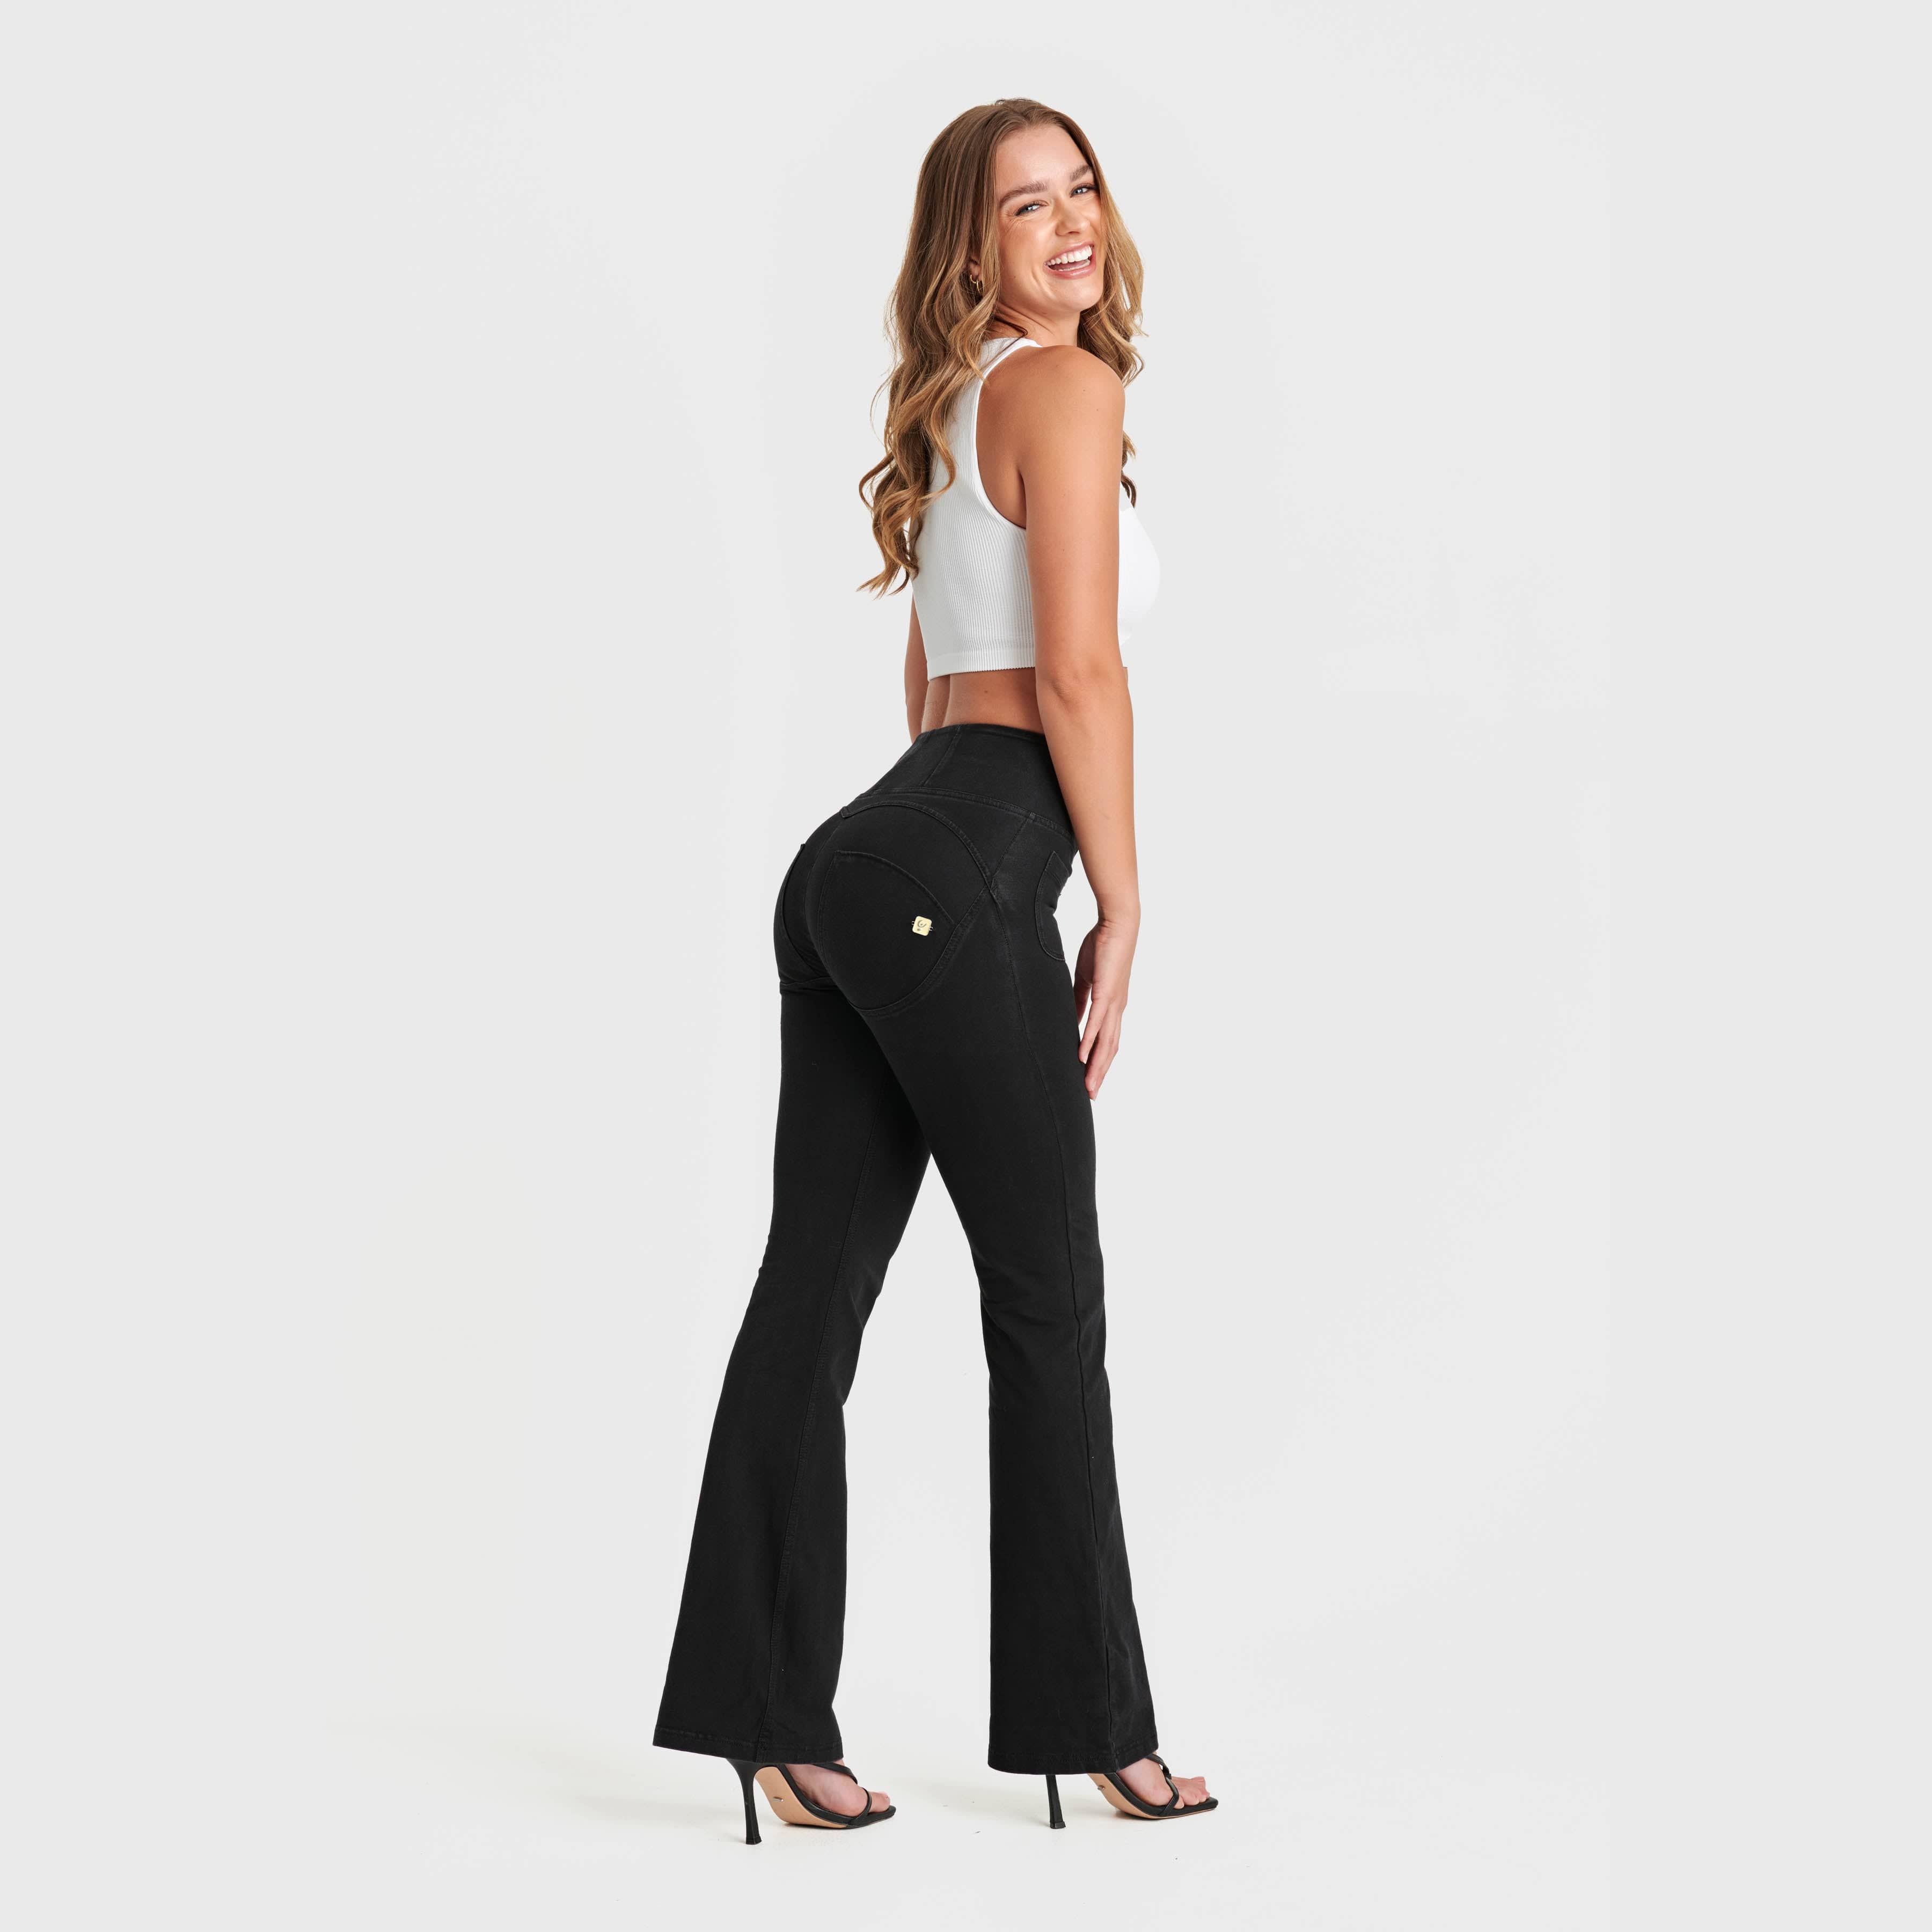 WR.UP® Denim with Front Pockets - Super High Waisted - Flare - Black + Black Stitching 3